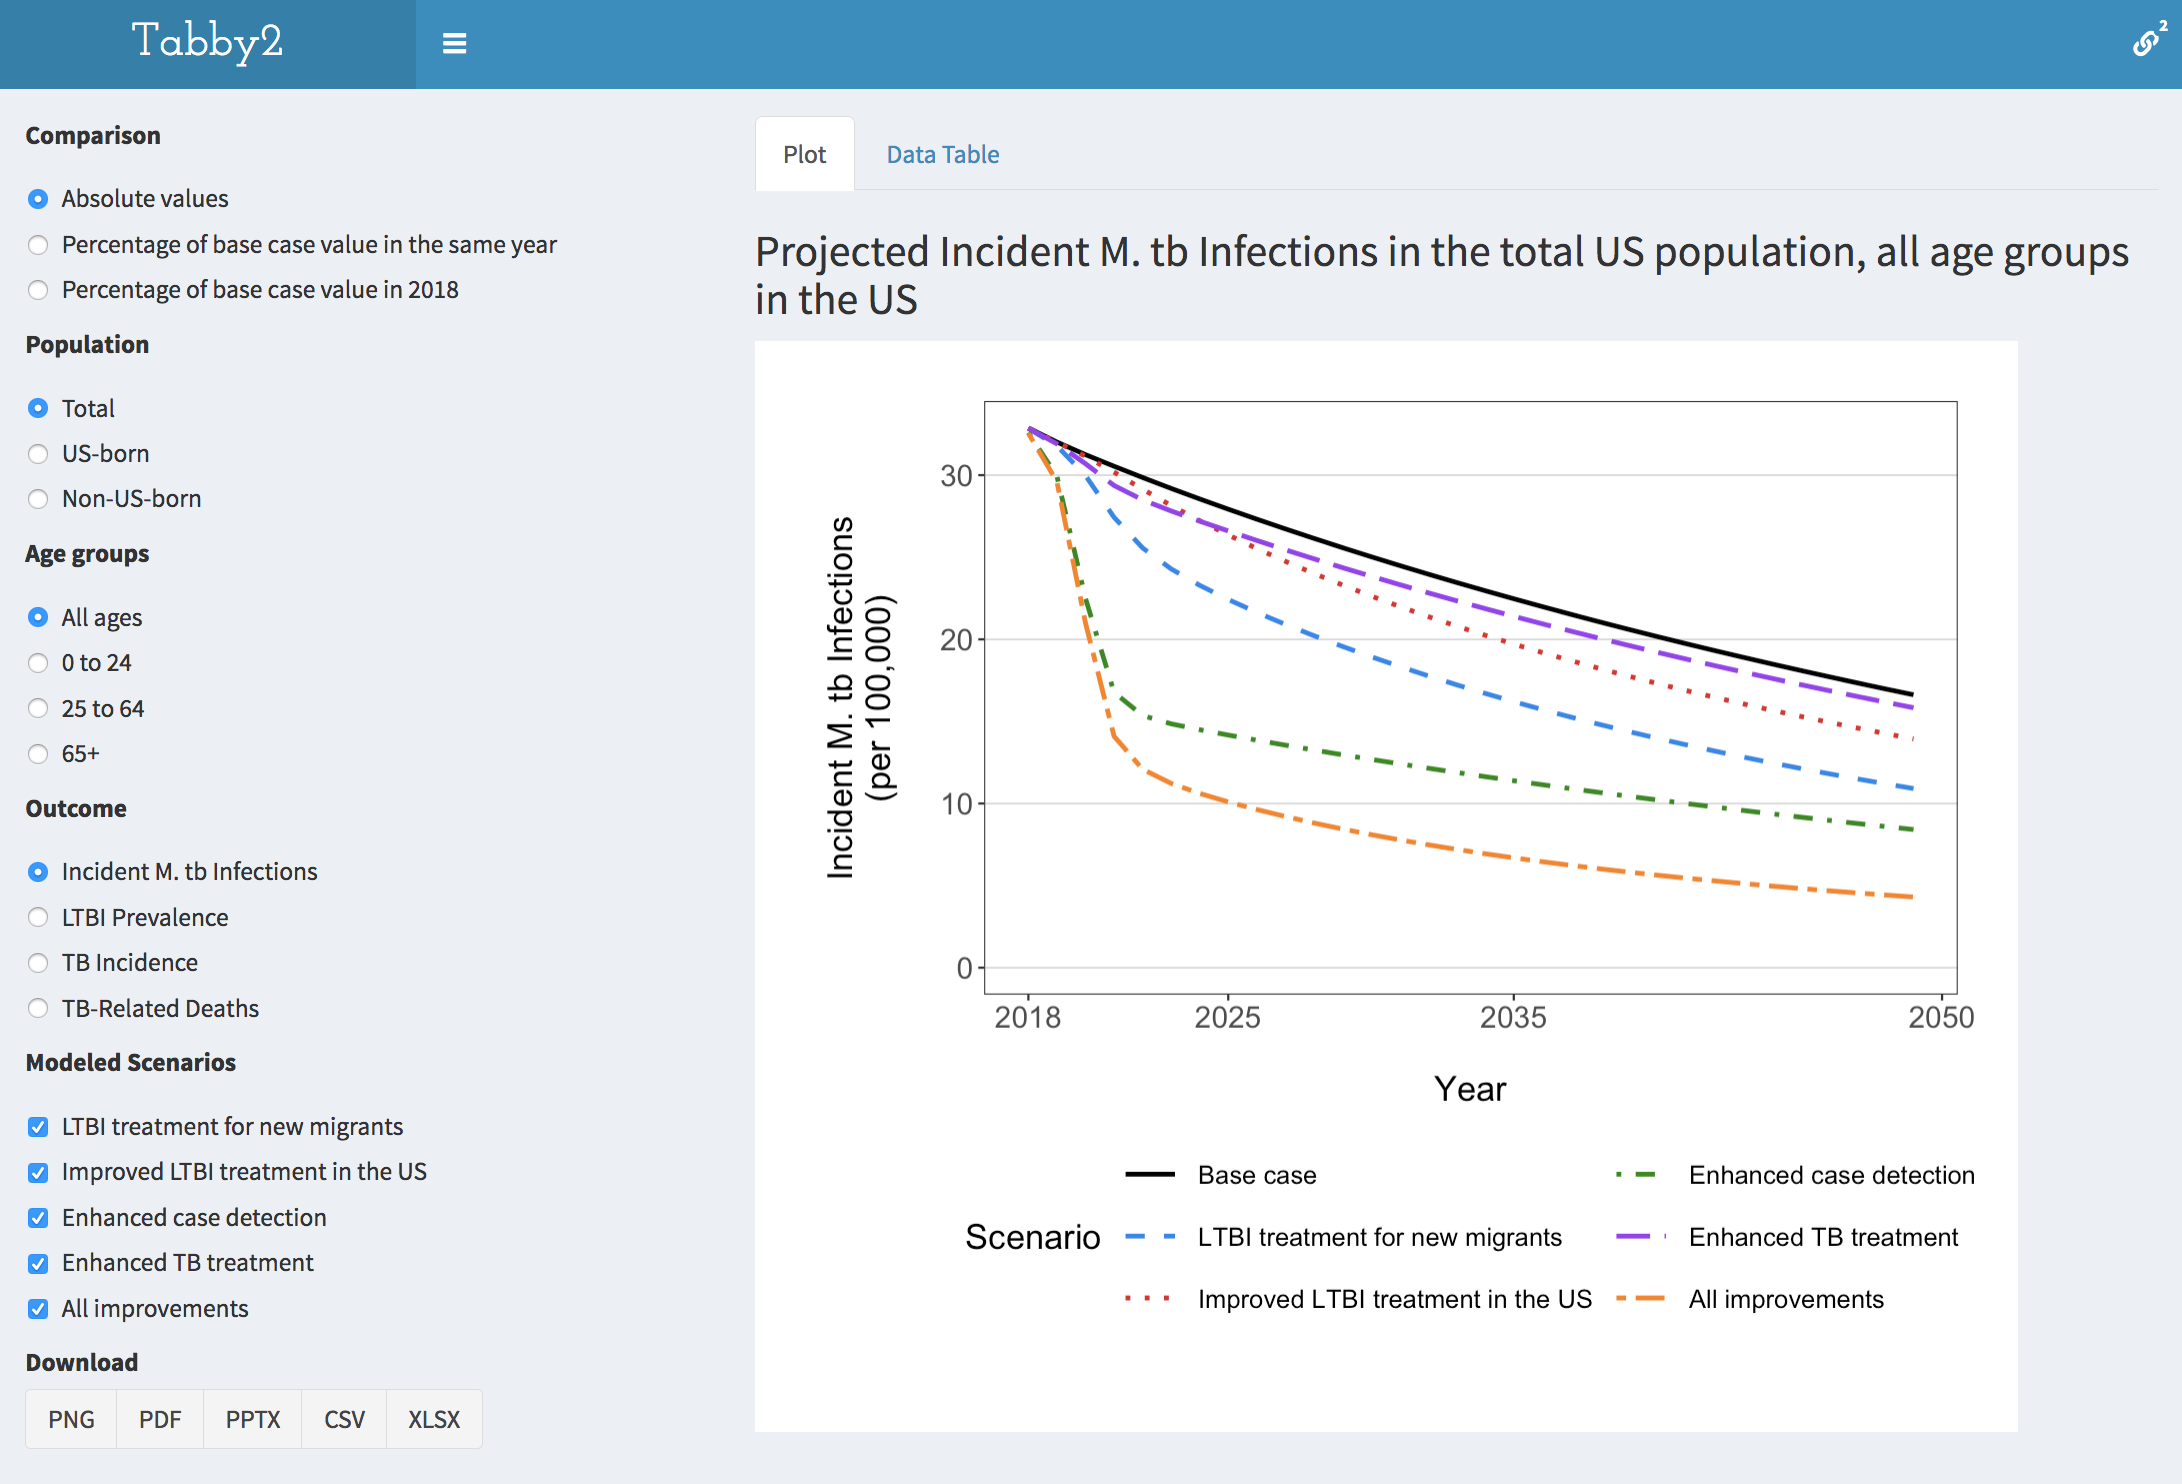 Figure 6: The Time Trends page of Tabby2 Depicting the Incident M. tuberculosis Infections Outcome for the 5 Predefined Scenarios